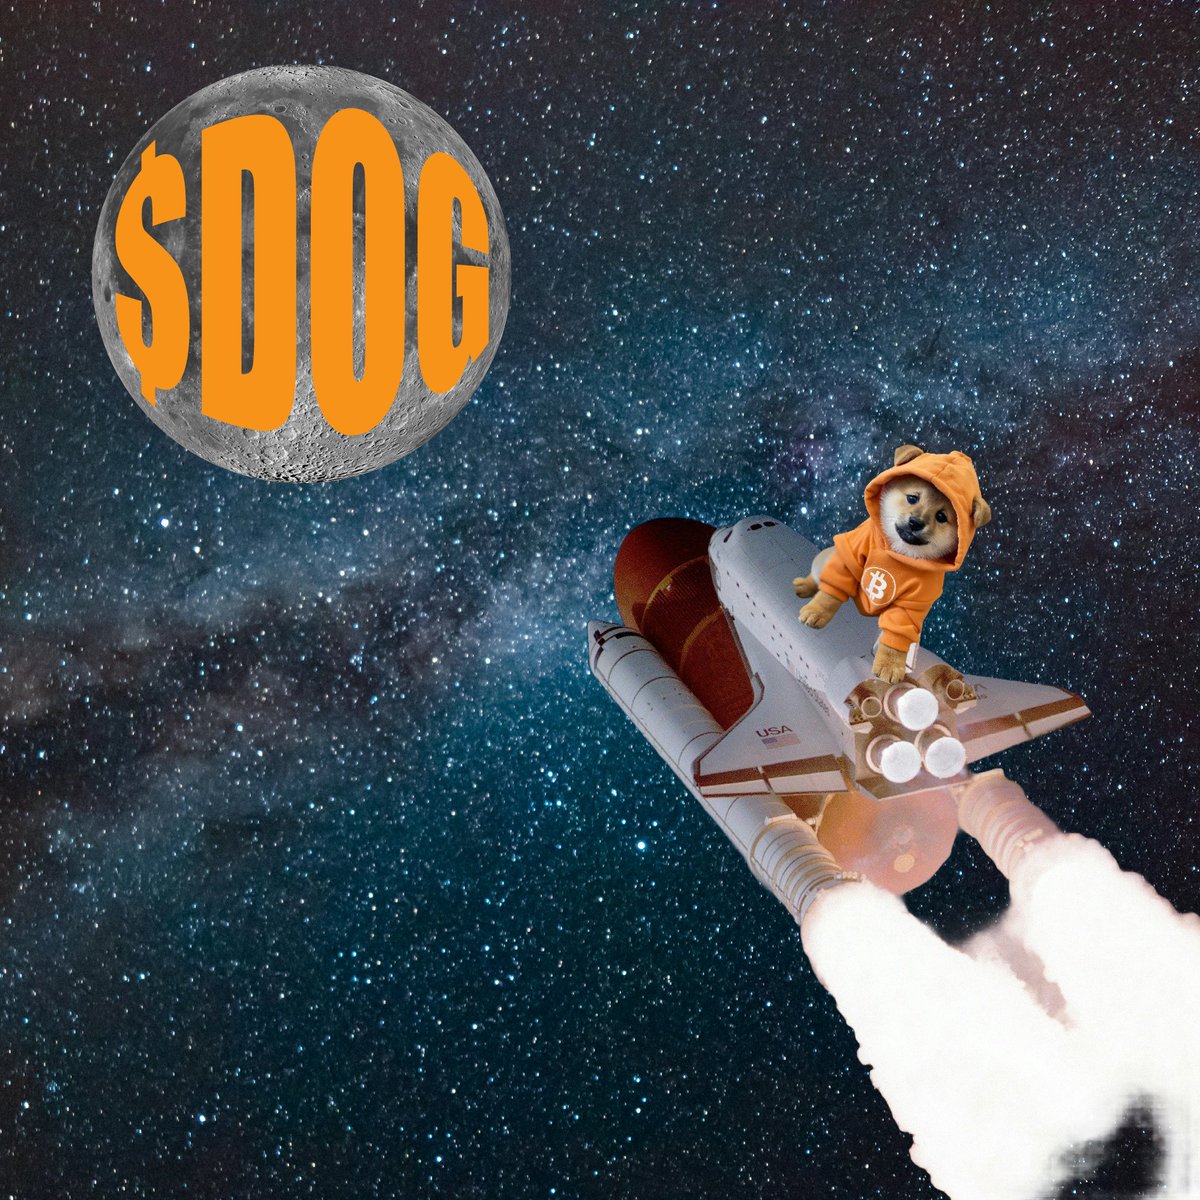 The $DOG army has one mission: DOG•GO•TO•THE•MOON